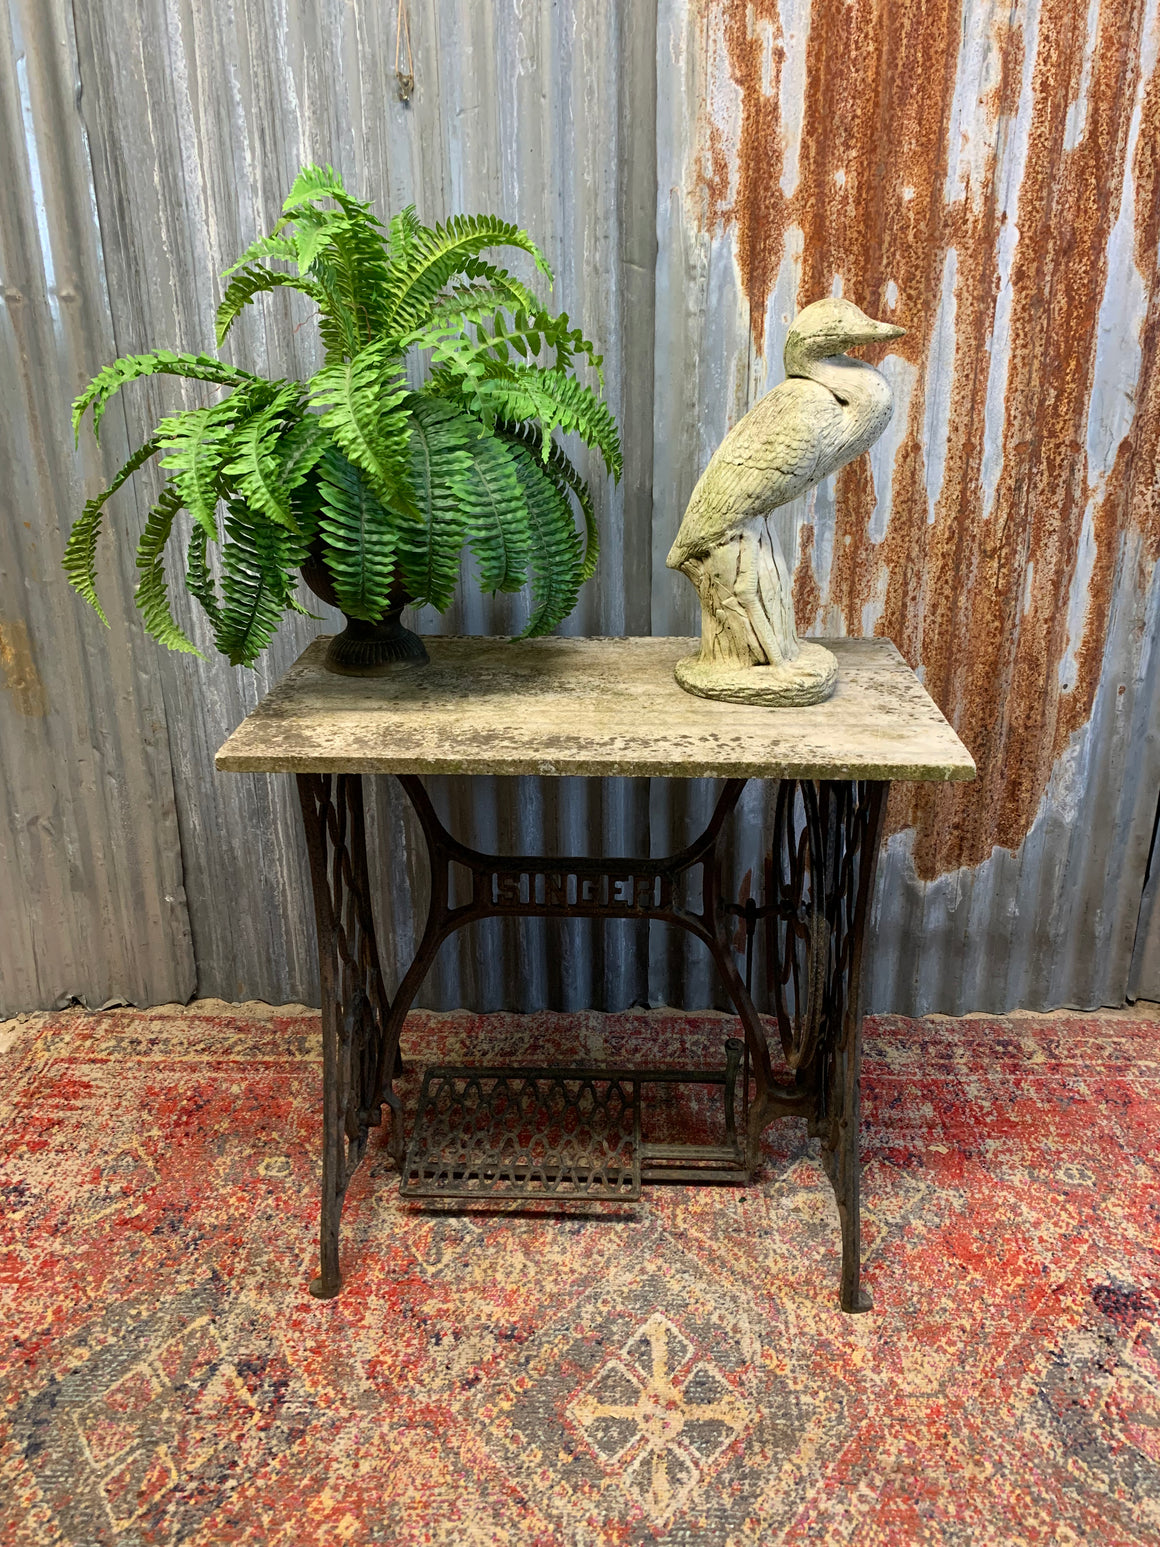 A cast iron Singer sewing table with marble top